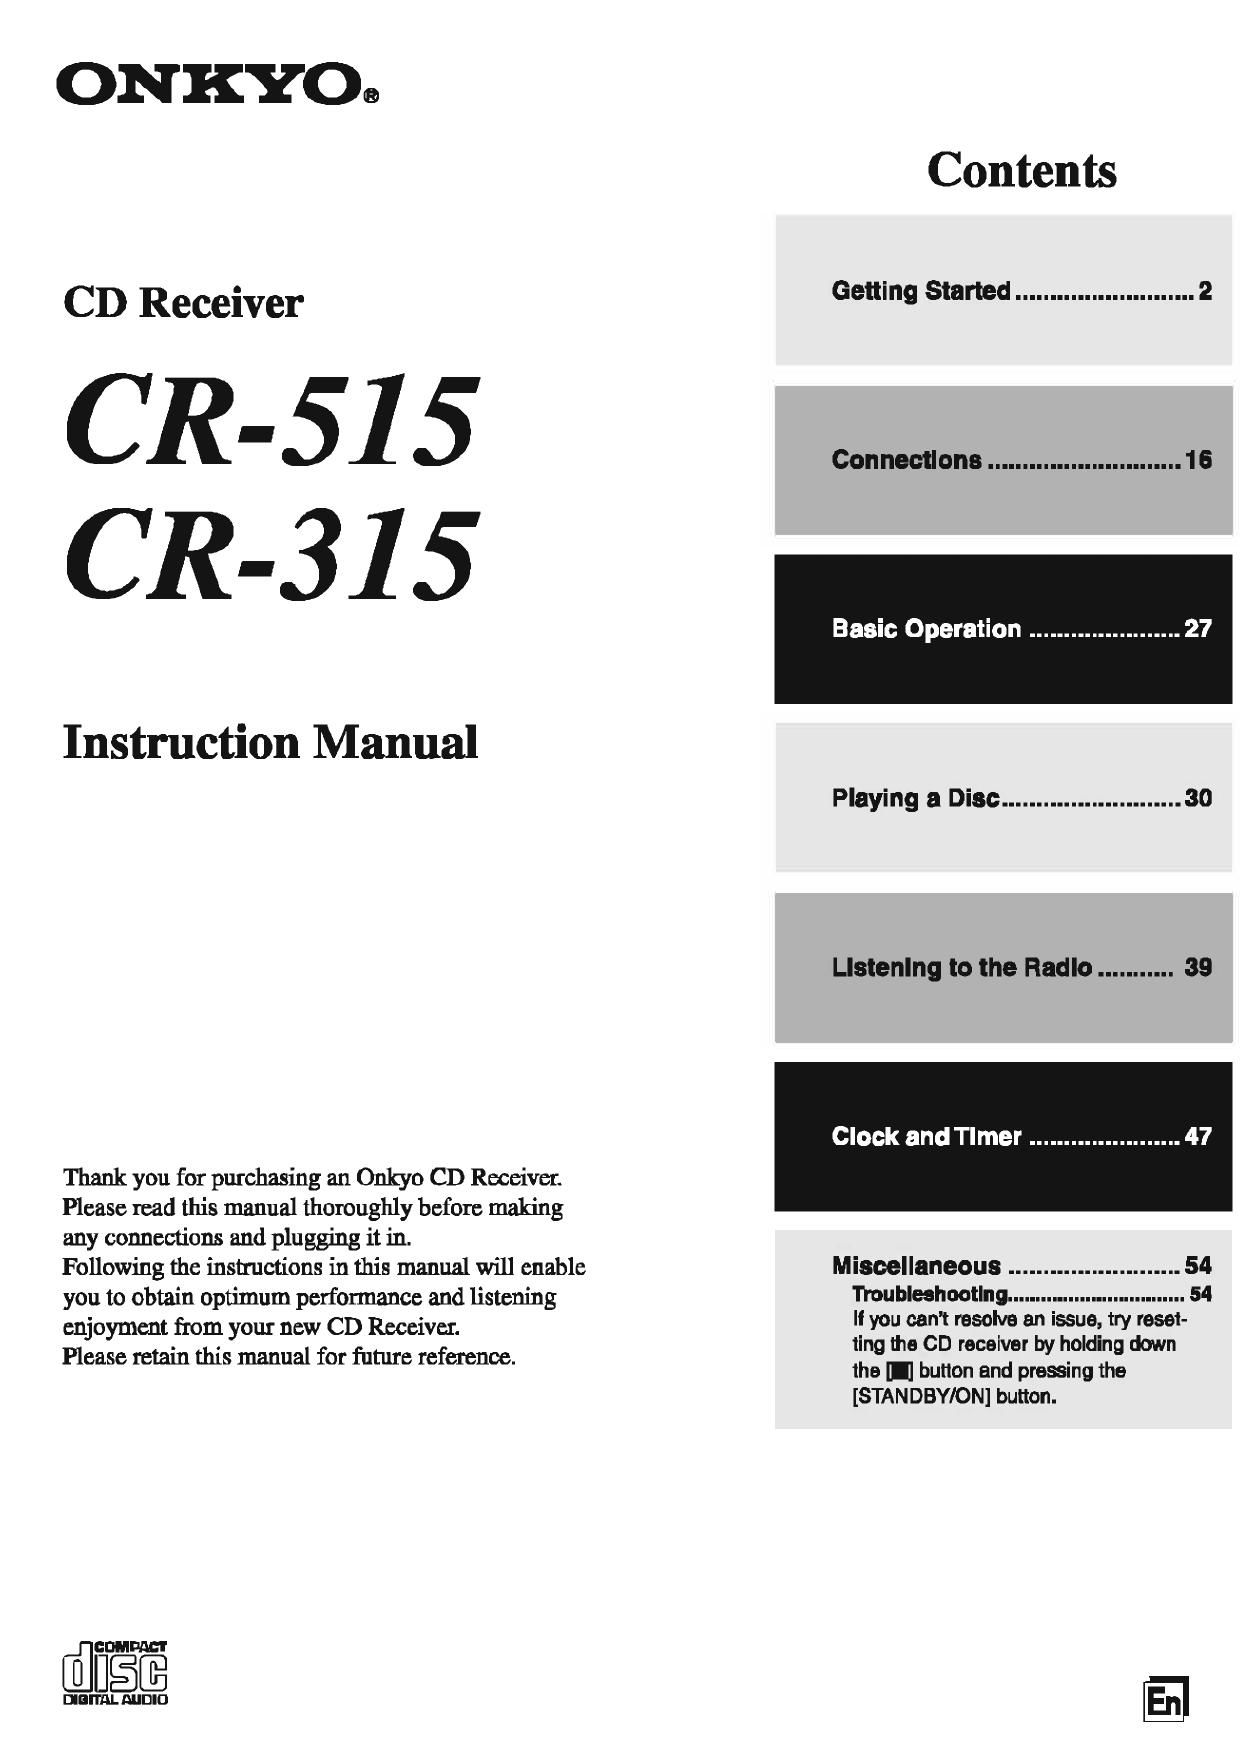 Onkyo CR 515 CR 315 Owners Manual